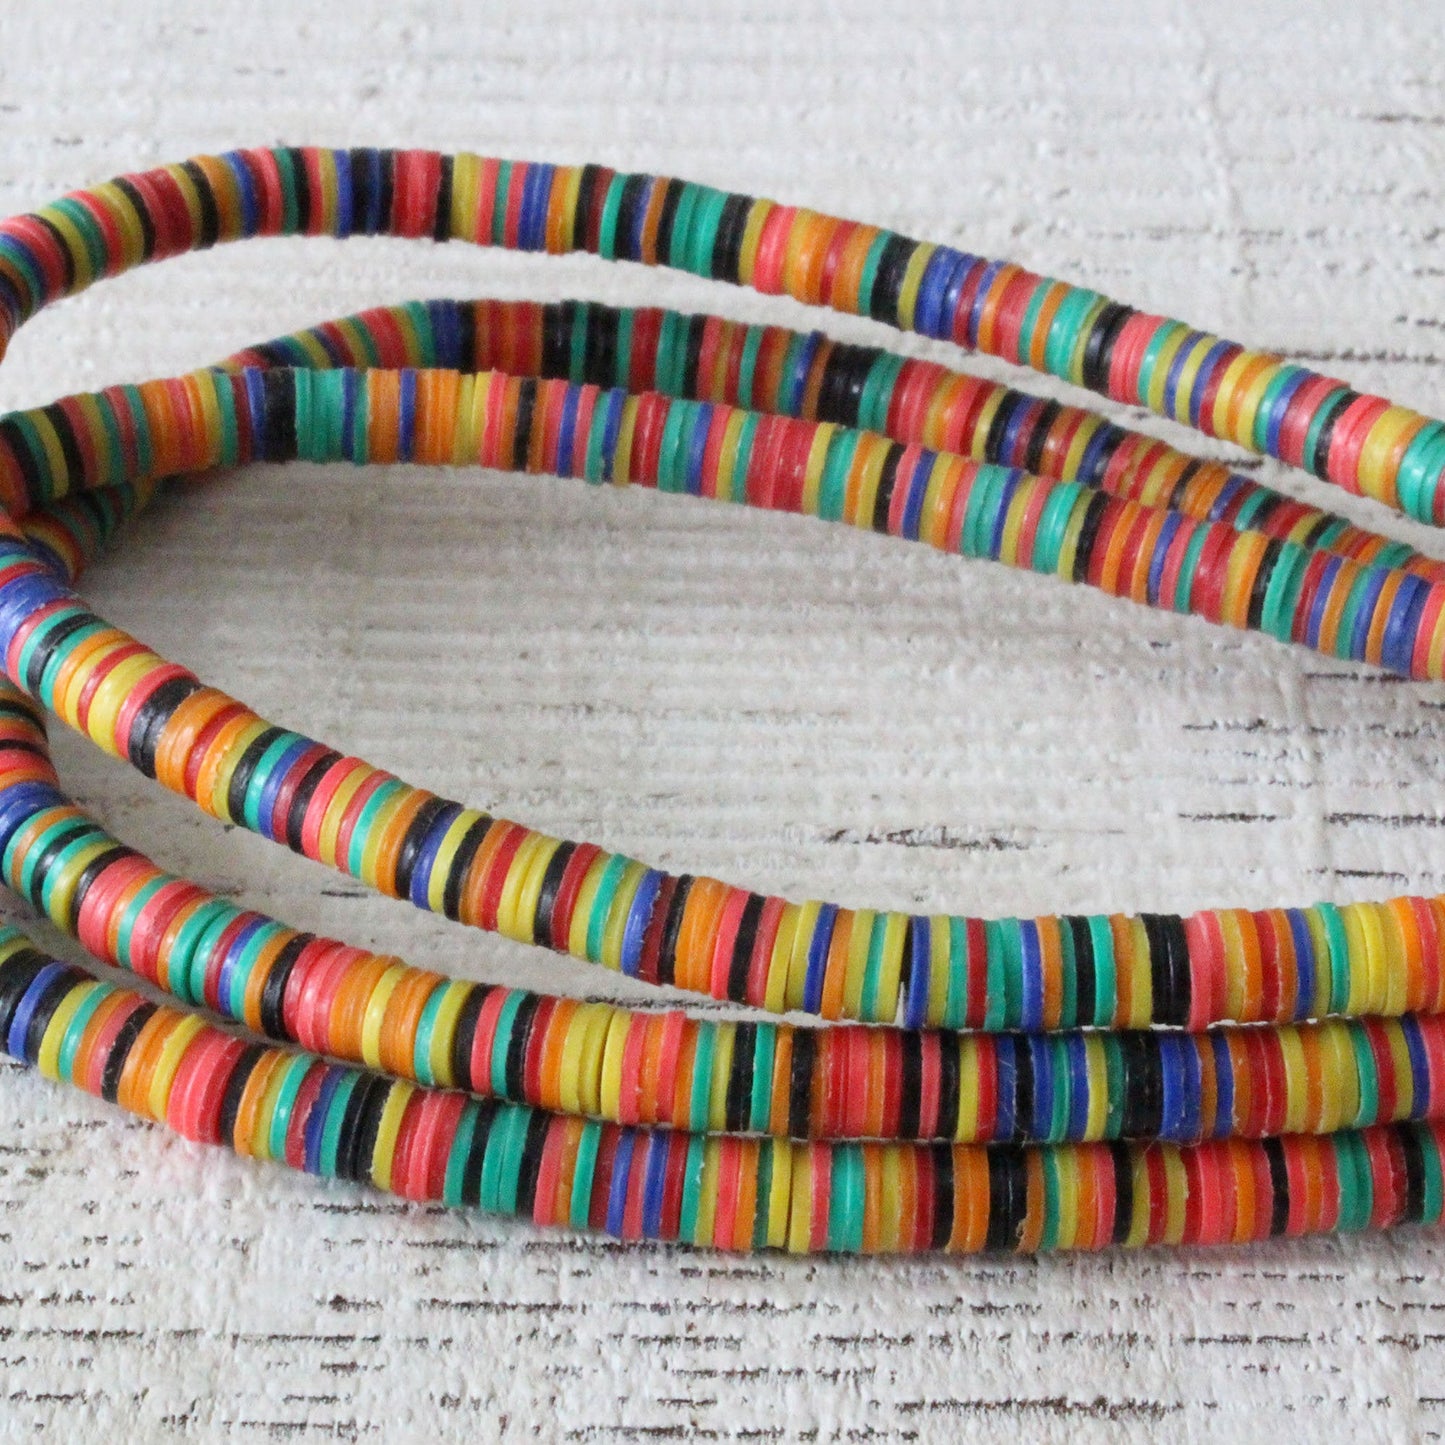 Load image into Gallery viewer, African Made Recycled Vinyl Disks - Colorful Recycled Beads - 33 Inch Strand
